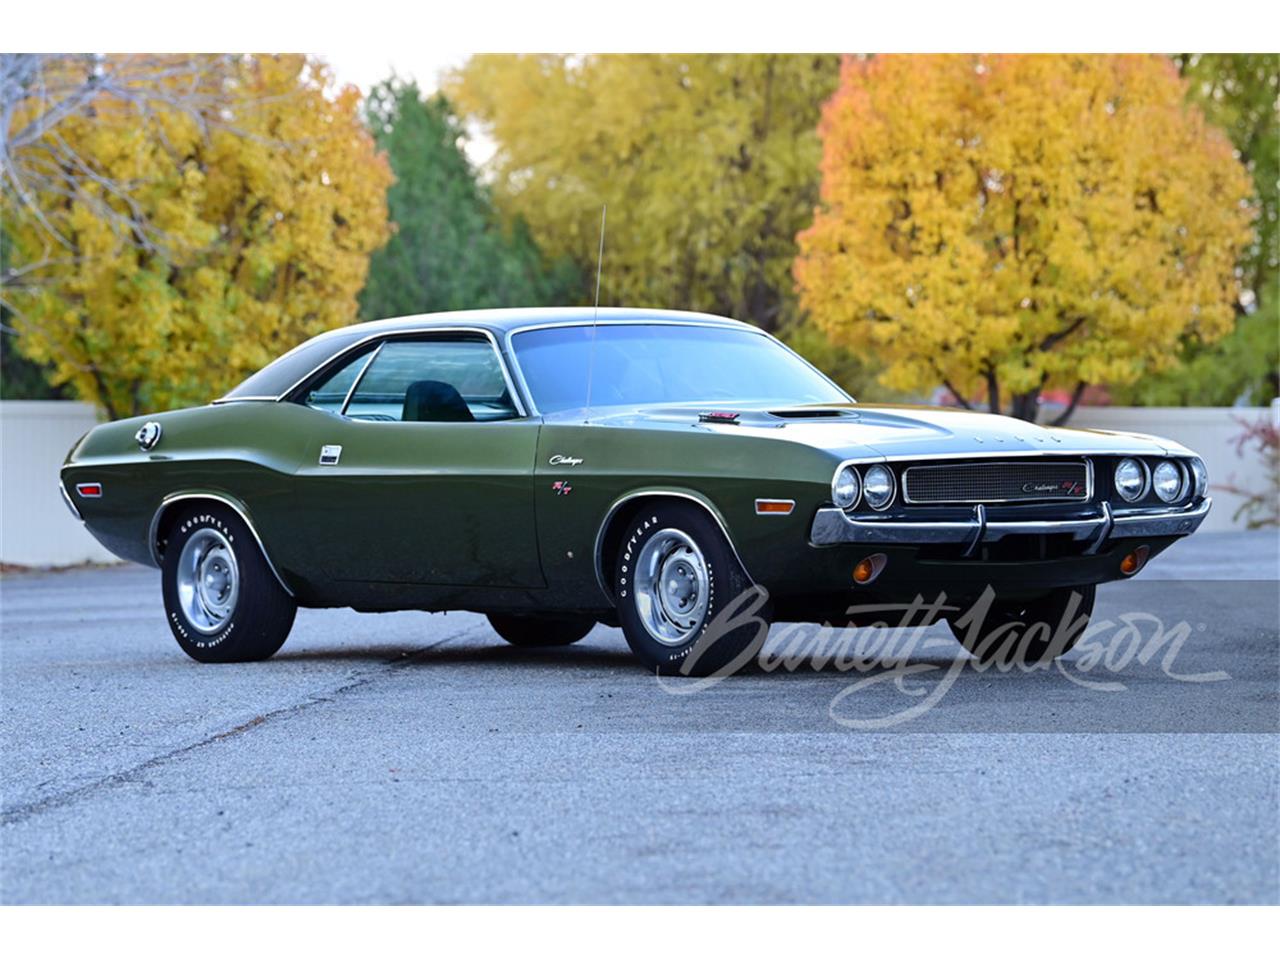 For Sale at Auction: 1970 Dodge Challenger R/T in Scottsdale, Arizona for sale in Scottsdale, AZ